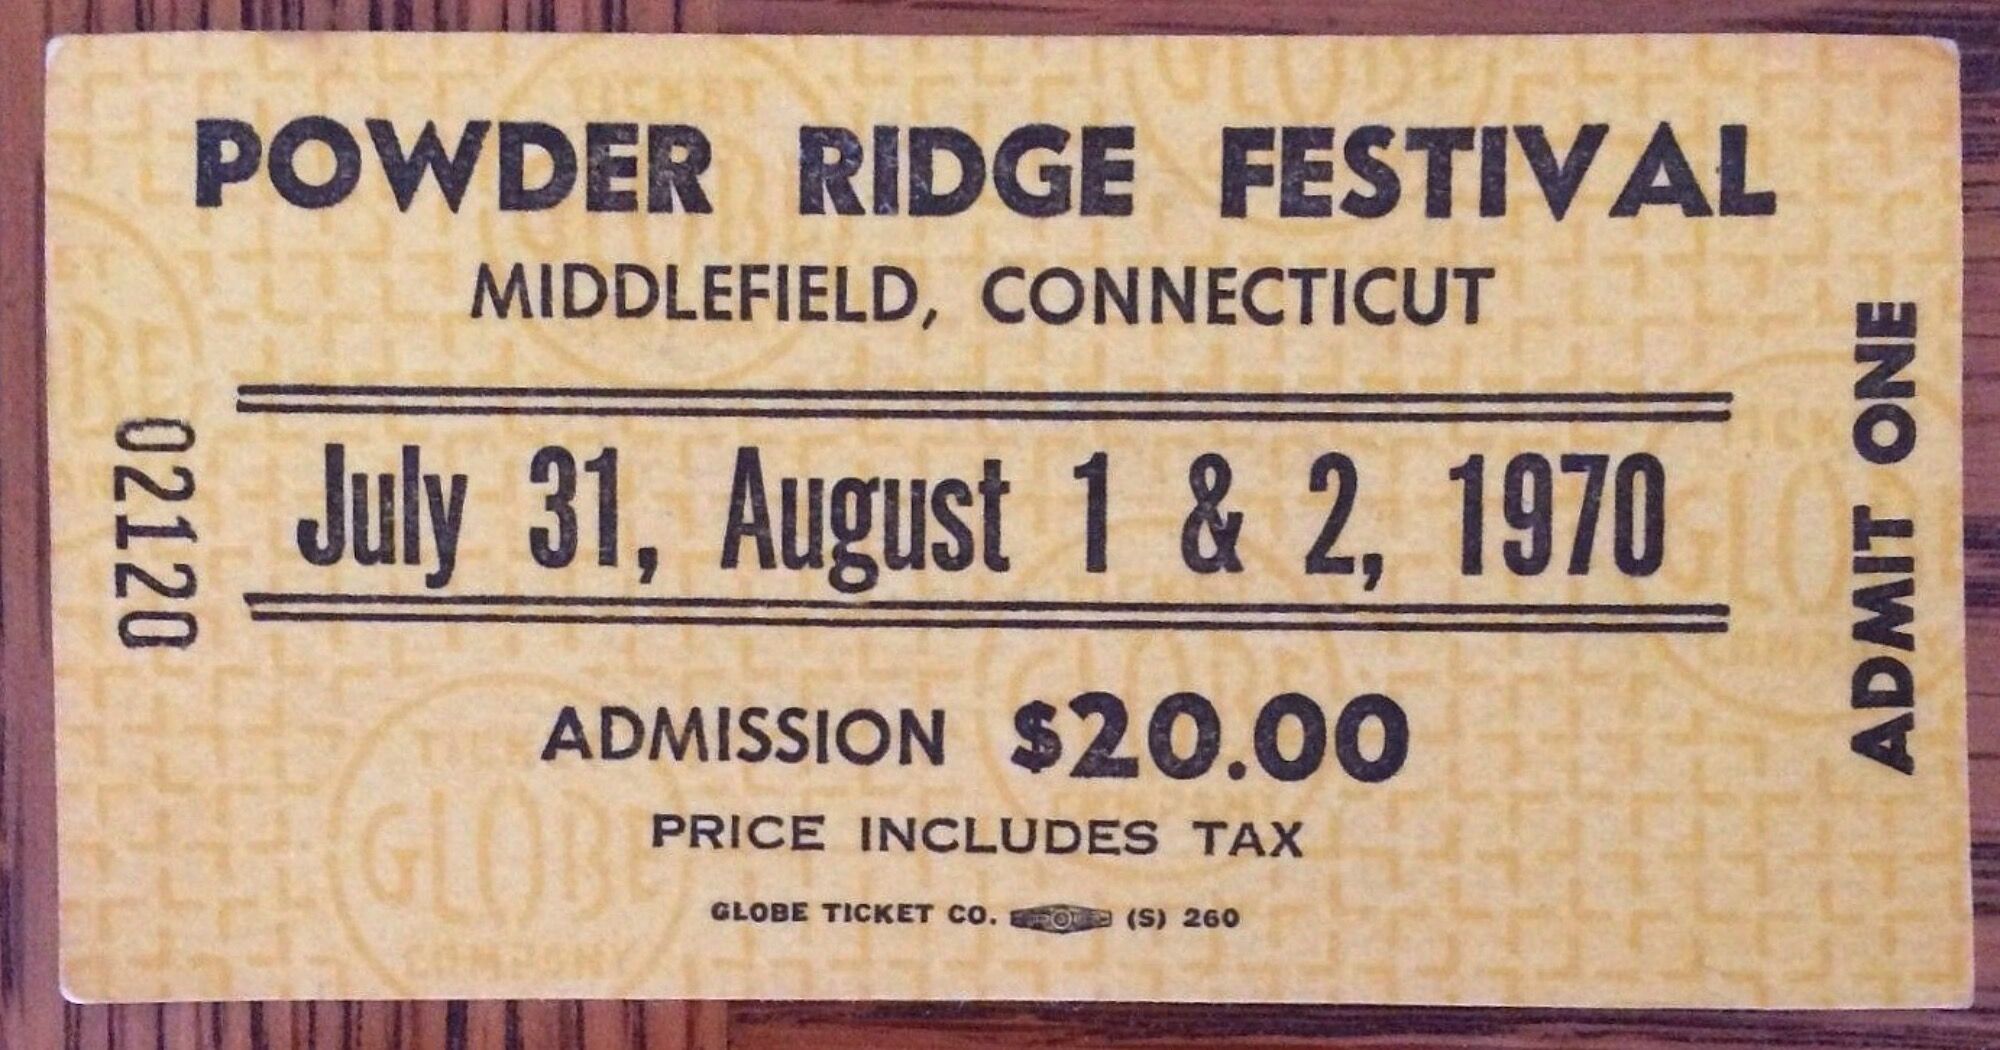 Powder Ridge Festival has been rescheduled to Sunday July 30th